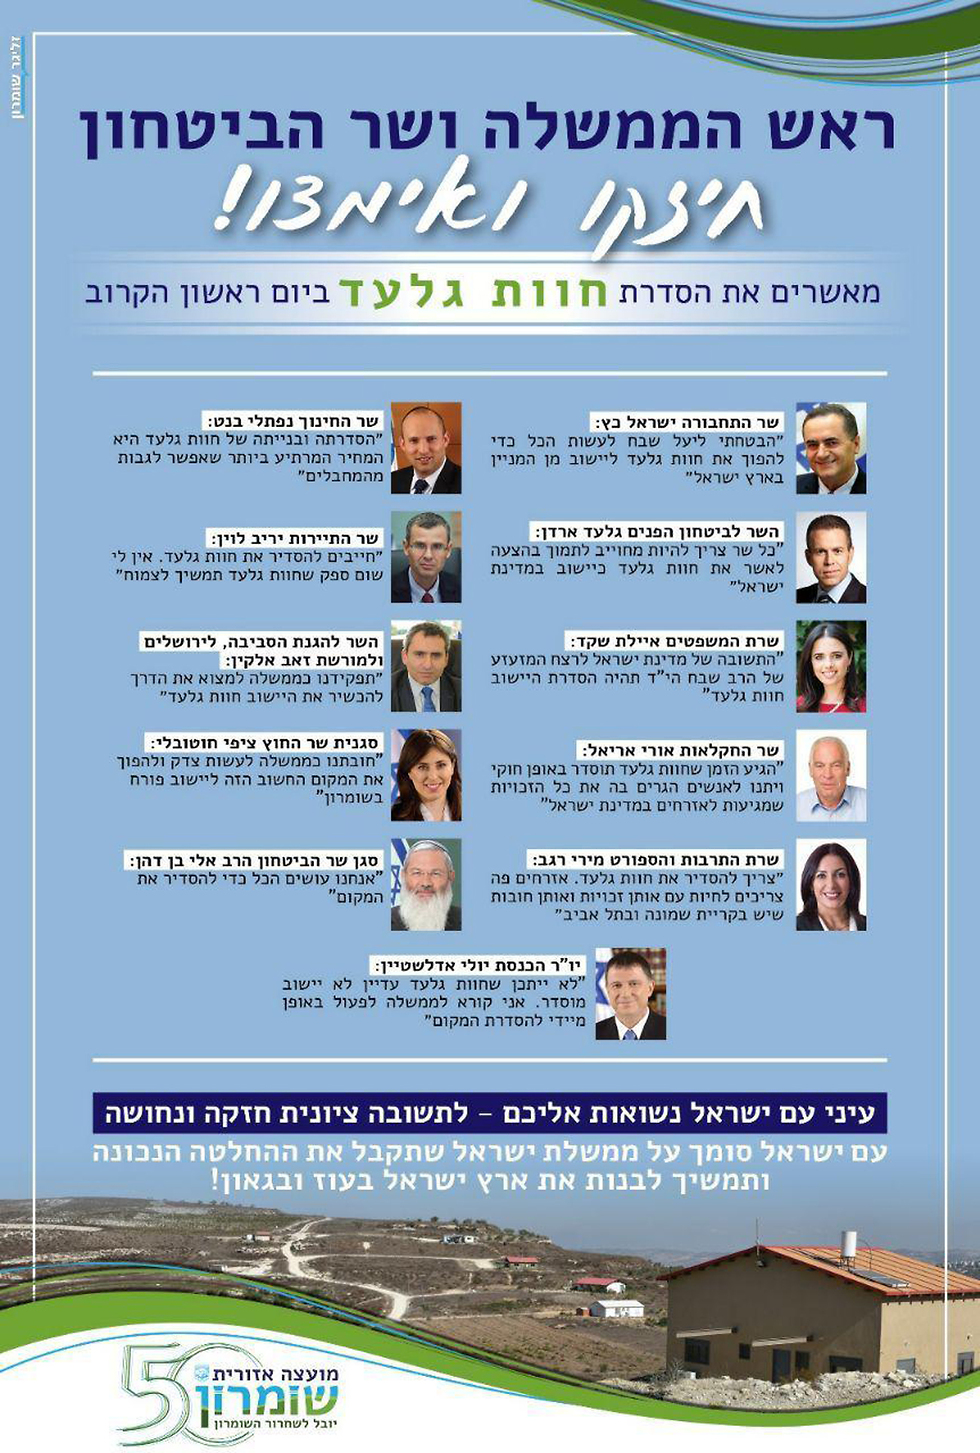 Advertisement calling for legalization of Havat Gilad with quotes by government members in support of the move  (Photo: Samaria Regional Council)